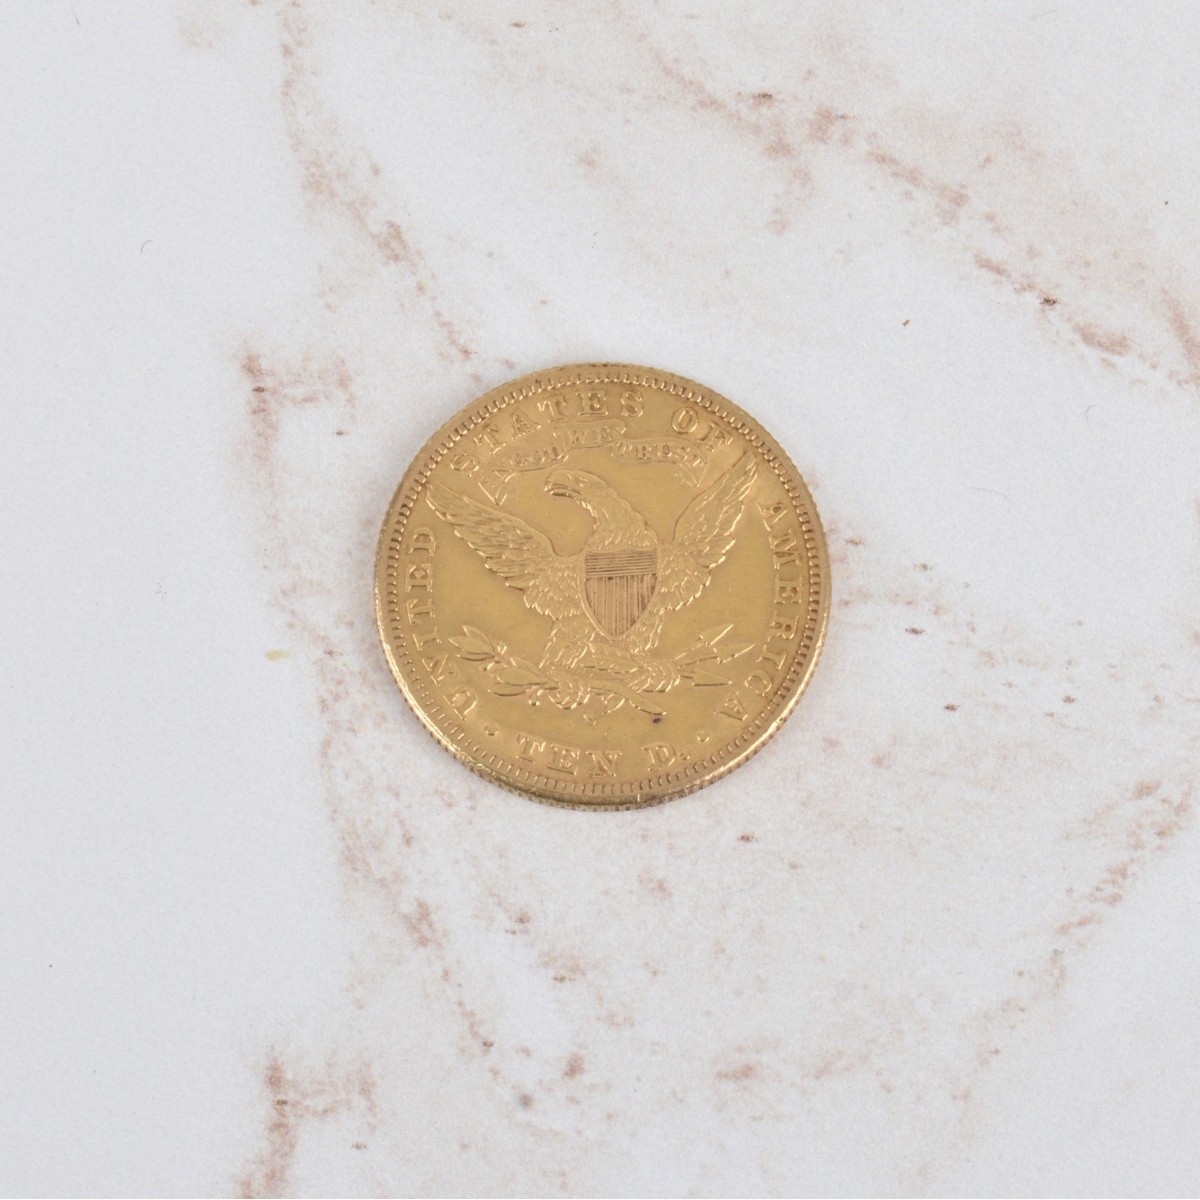 US $10 Gold Coin